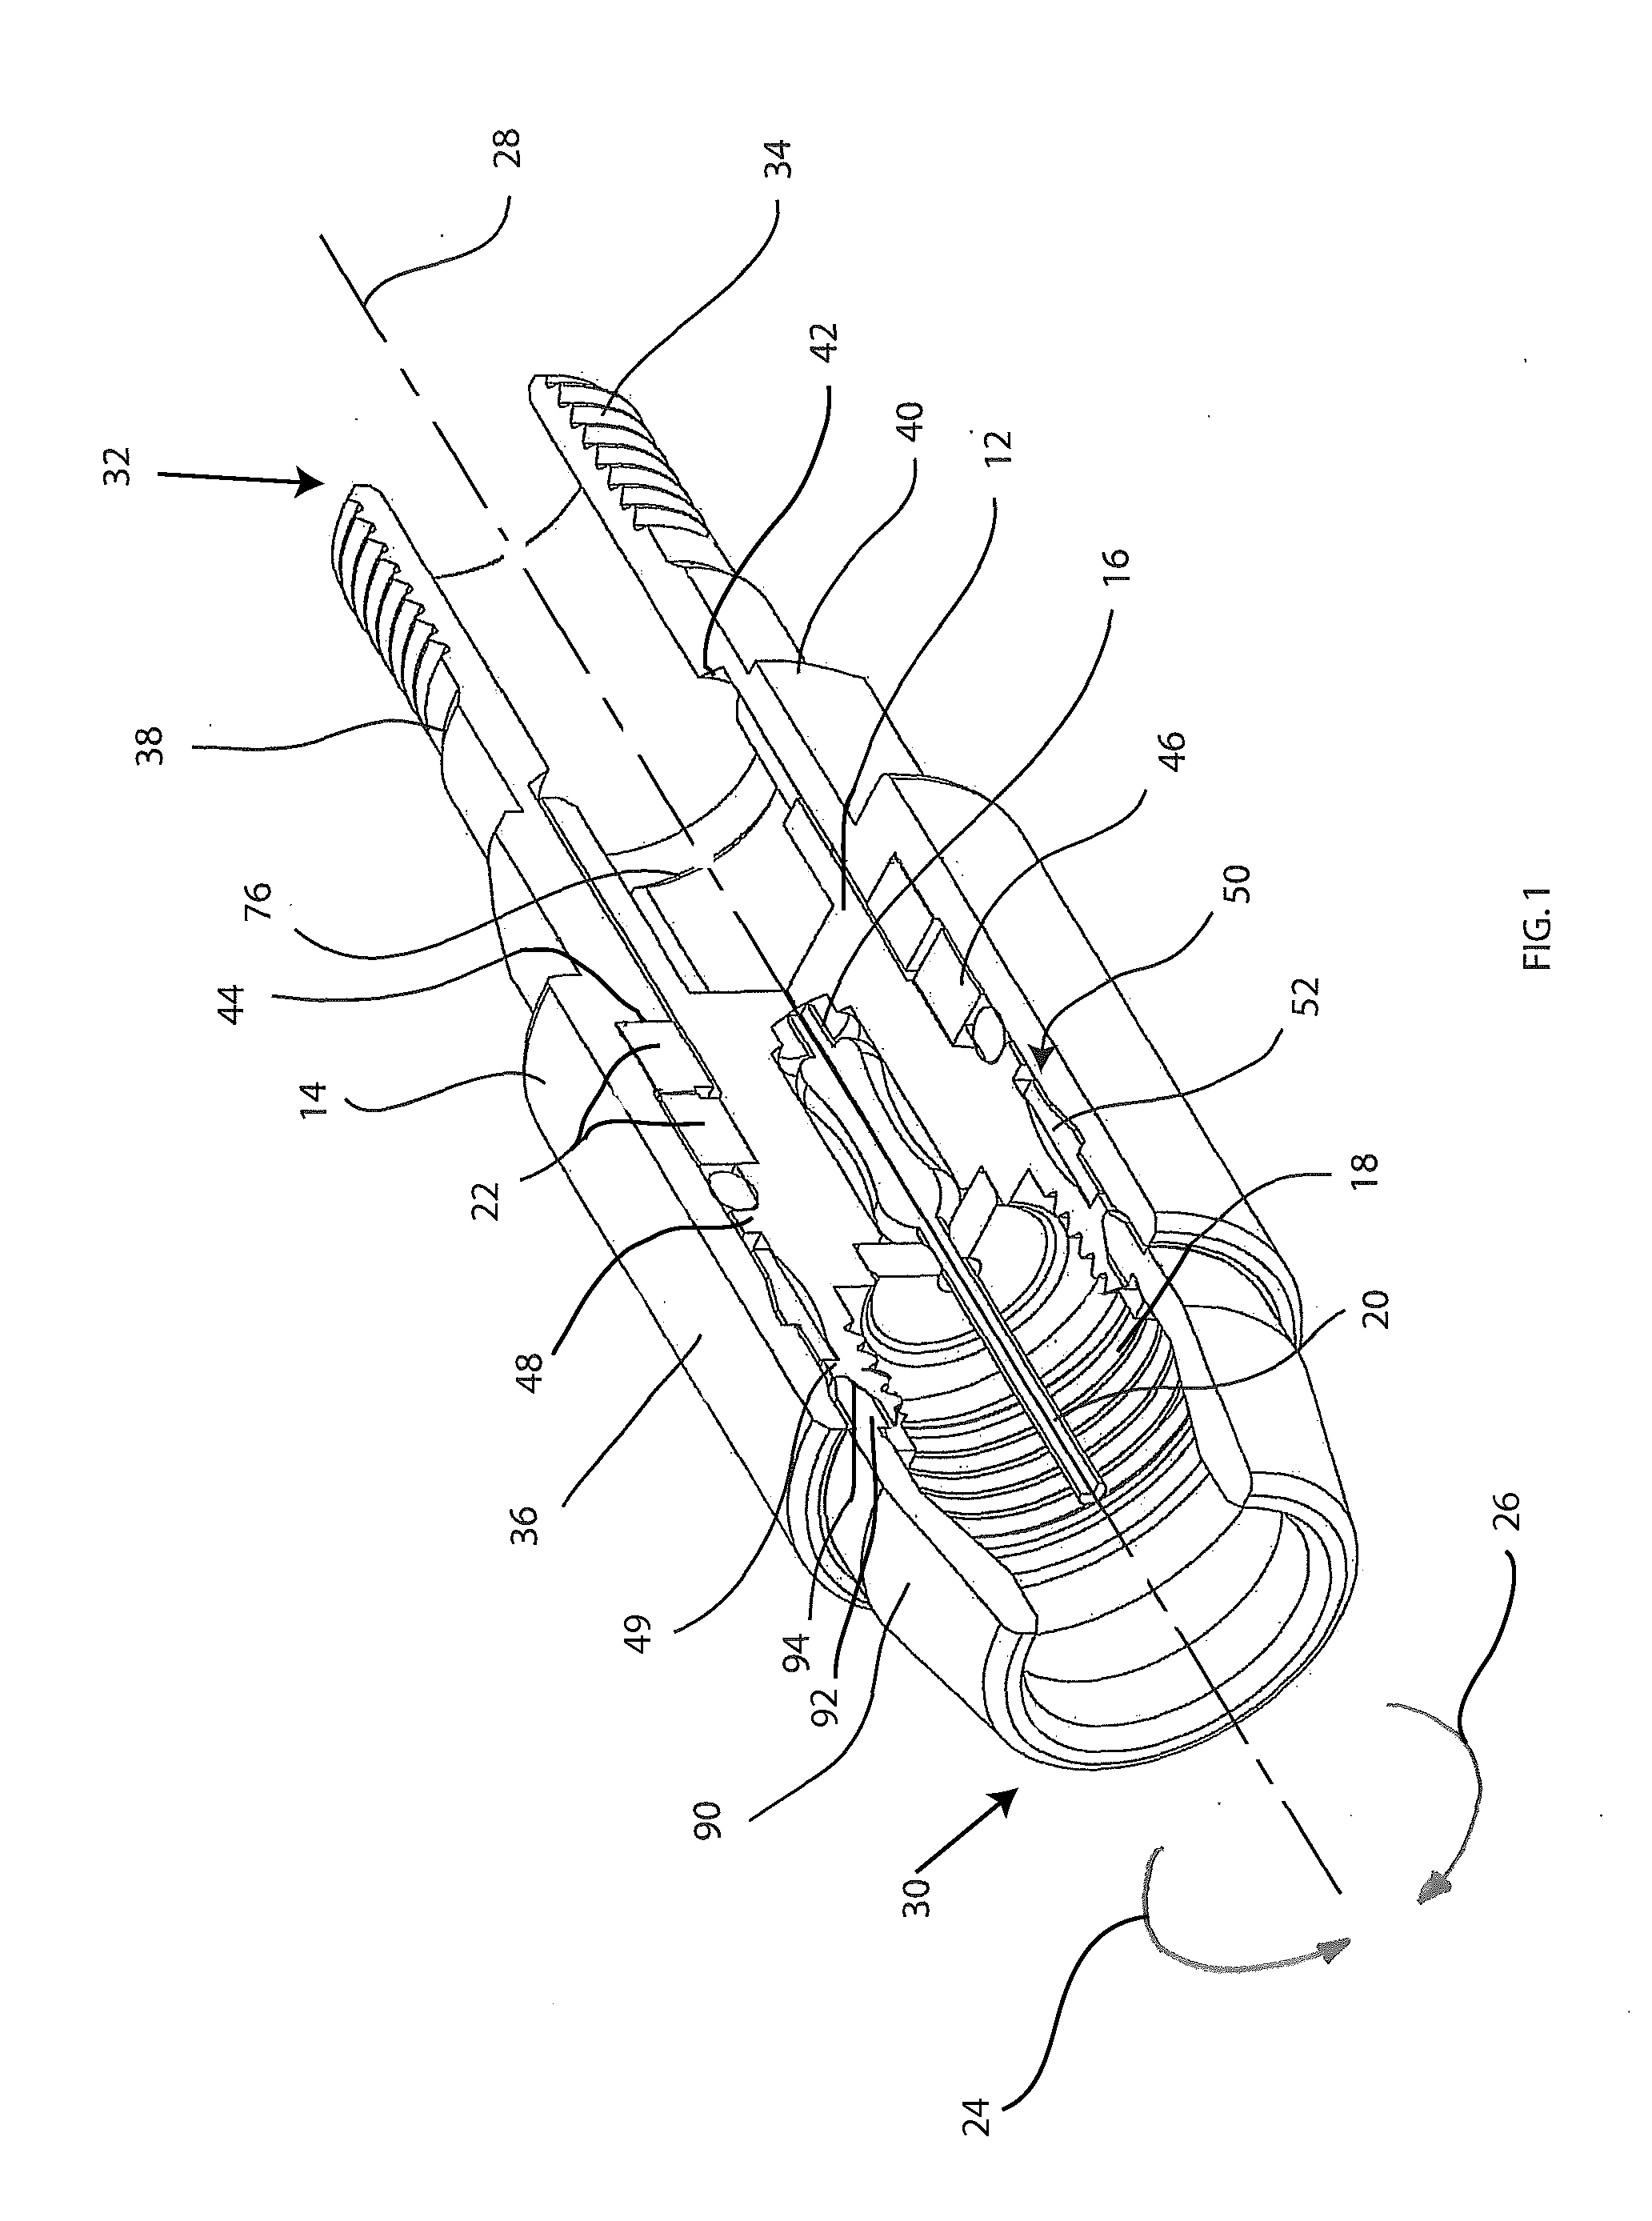 Coaxial cable port locking terminator and method of use thereof